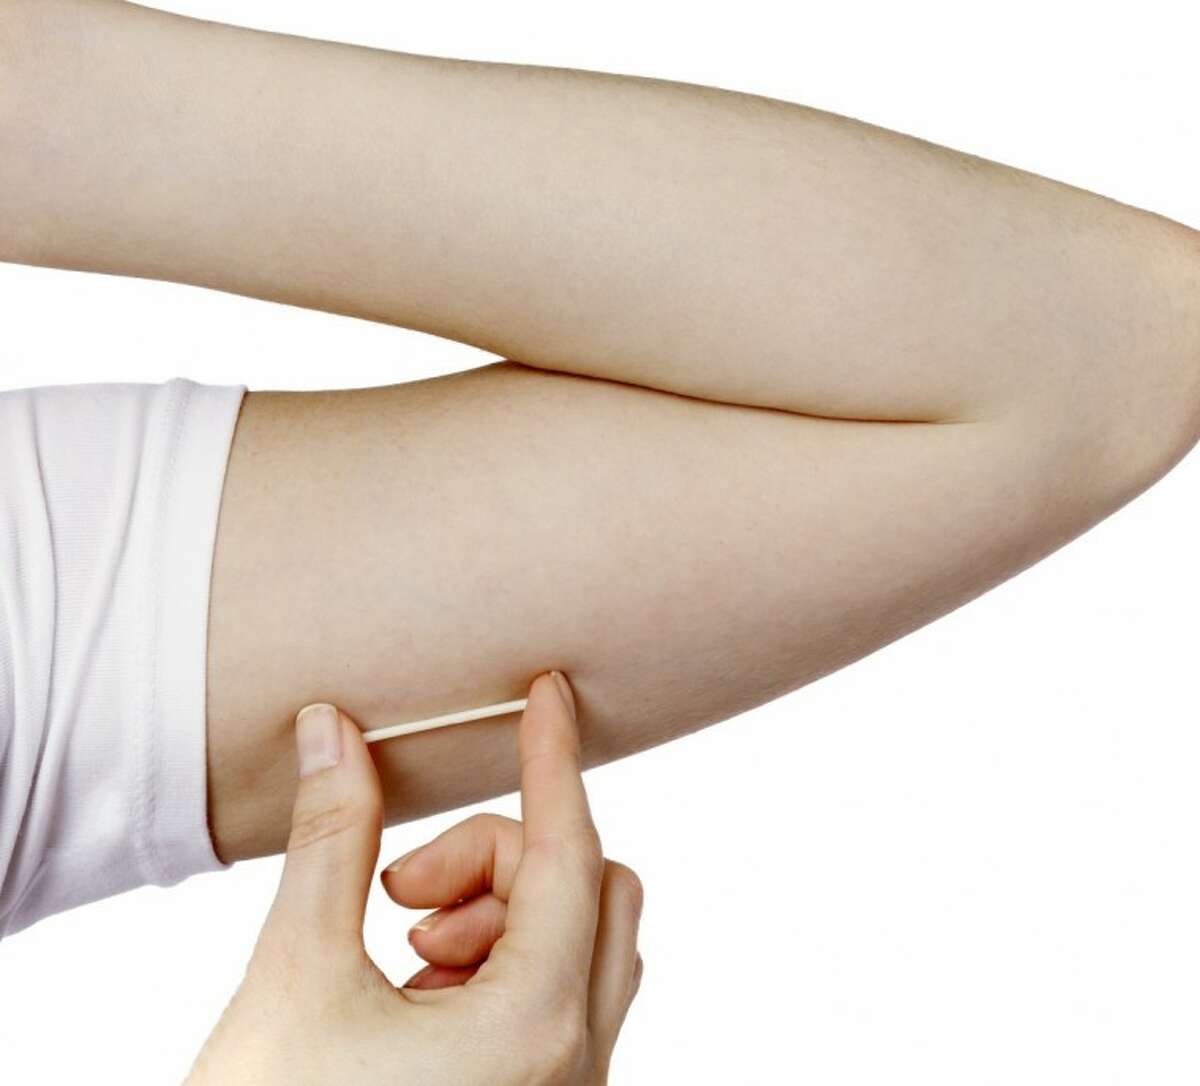 In this undated image provided by Merck, a model holds the Nexplanon hormonal implant for birth control.